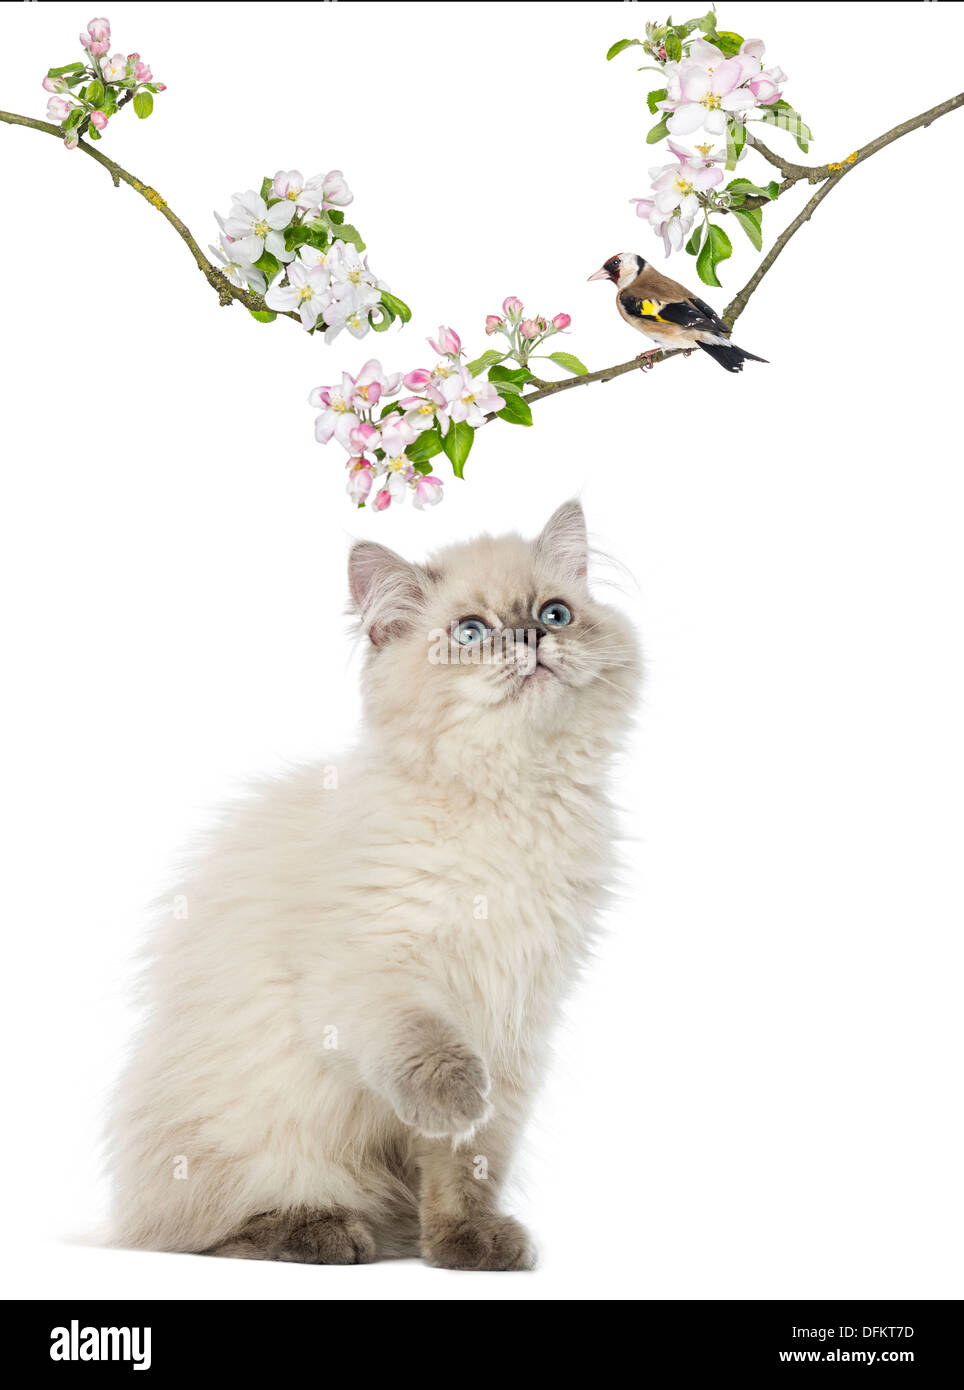 British Longhair kitten looking up at a bird perching on a flowery branch, against white background Stock Photo